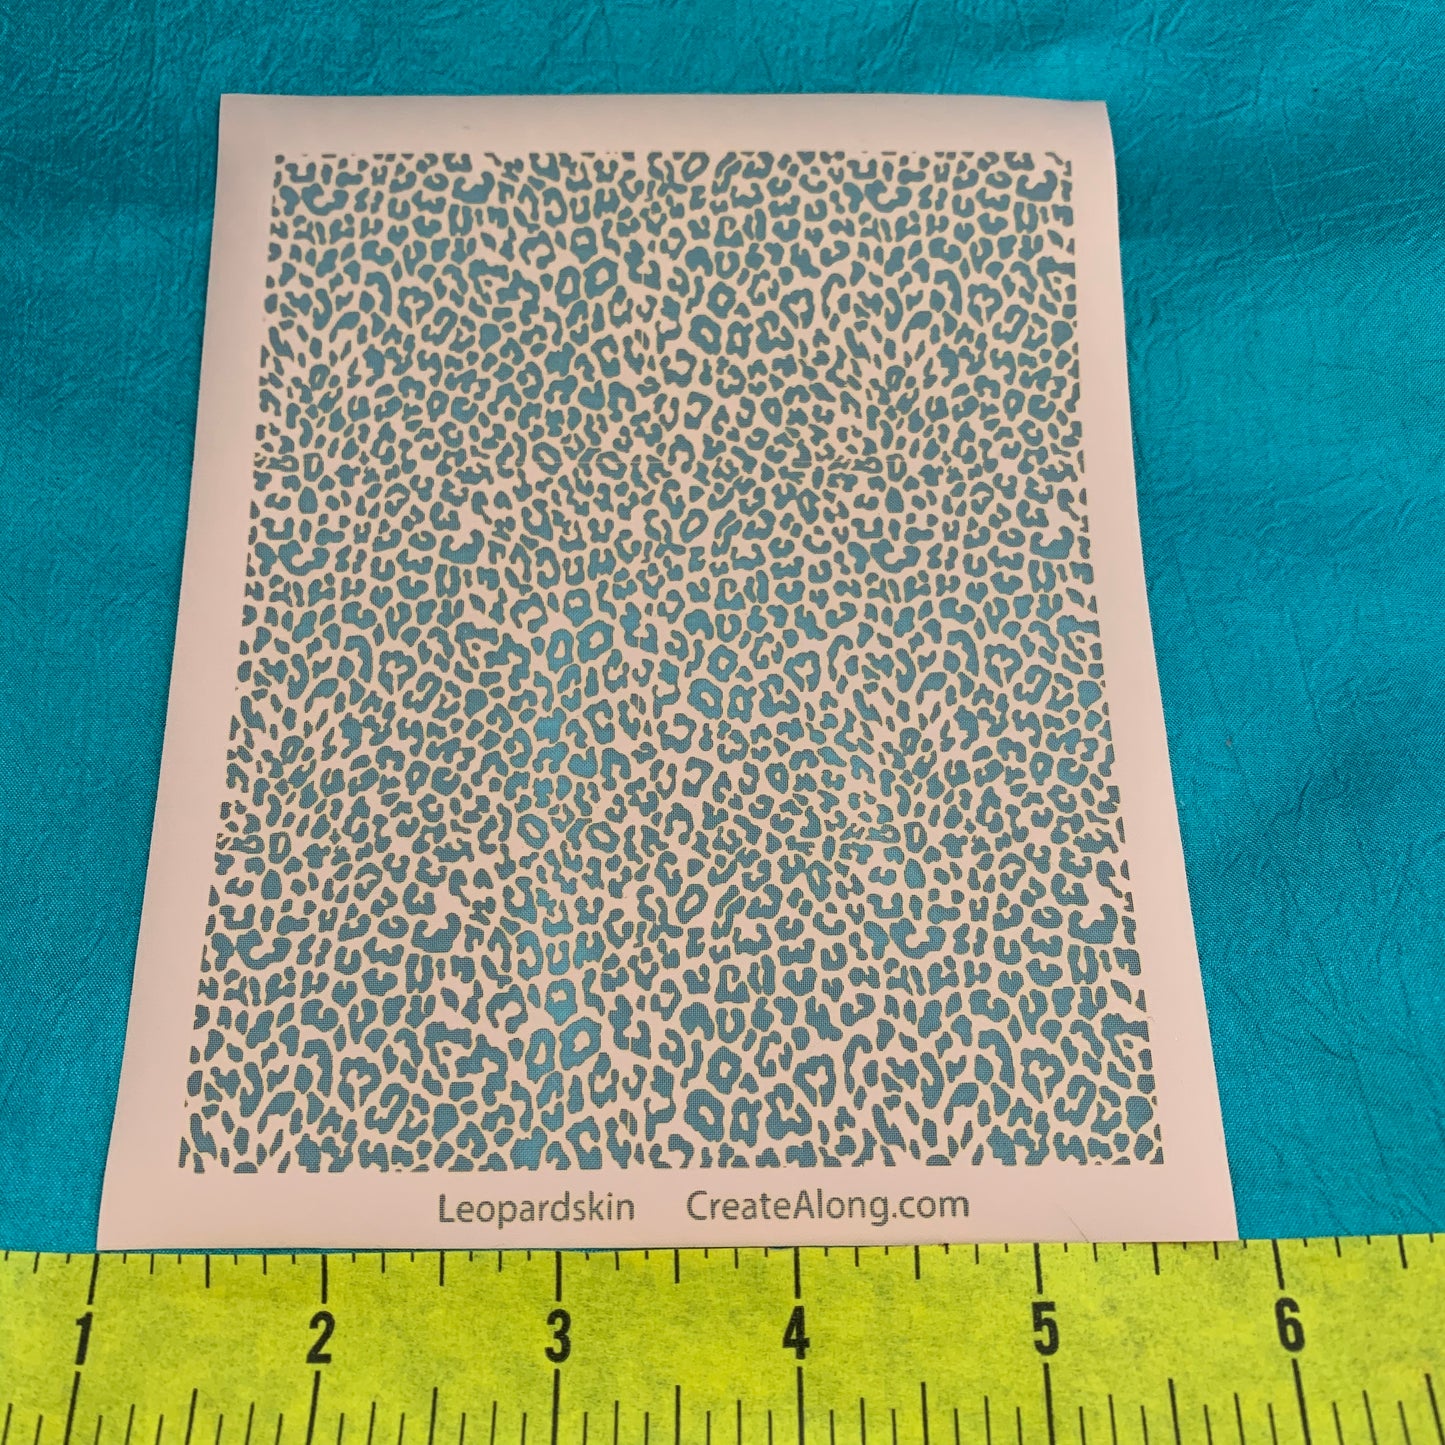 Silk Screen Leopard Print Stencil For Polymer Clay - Polymer Clay TV tutorial and supplies